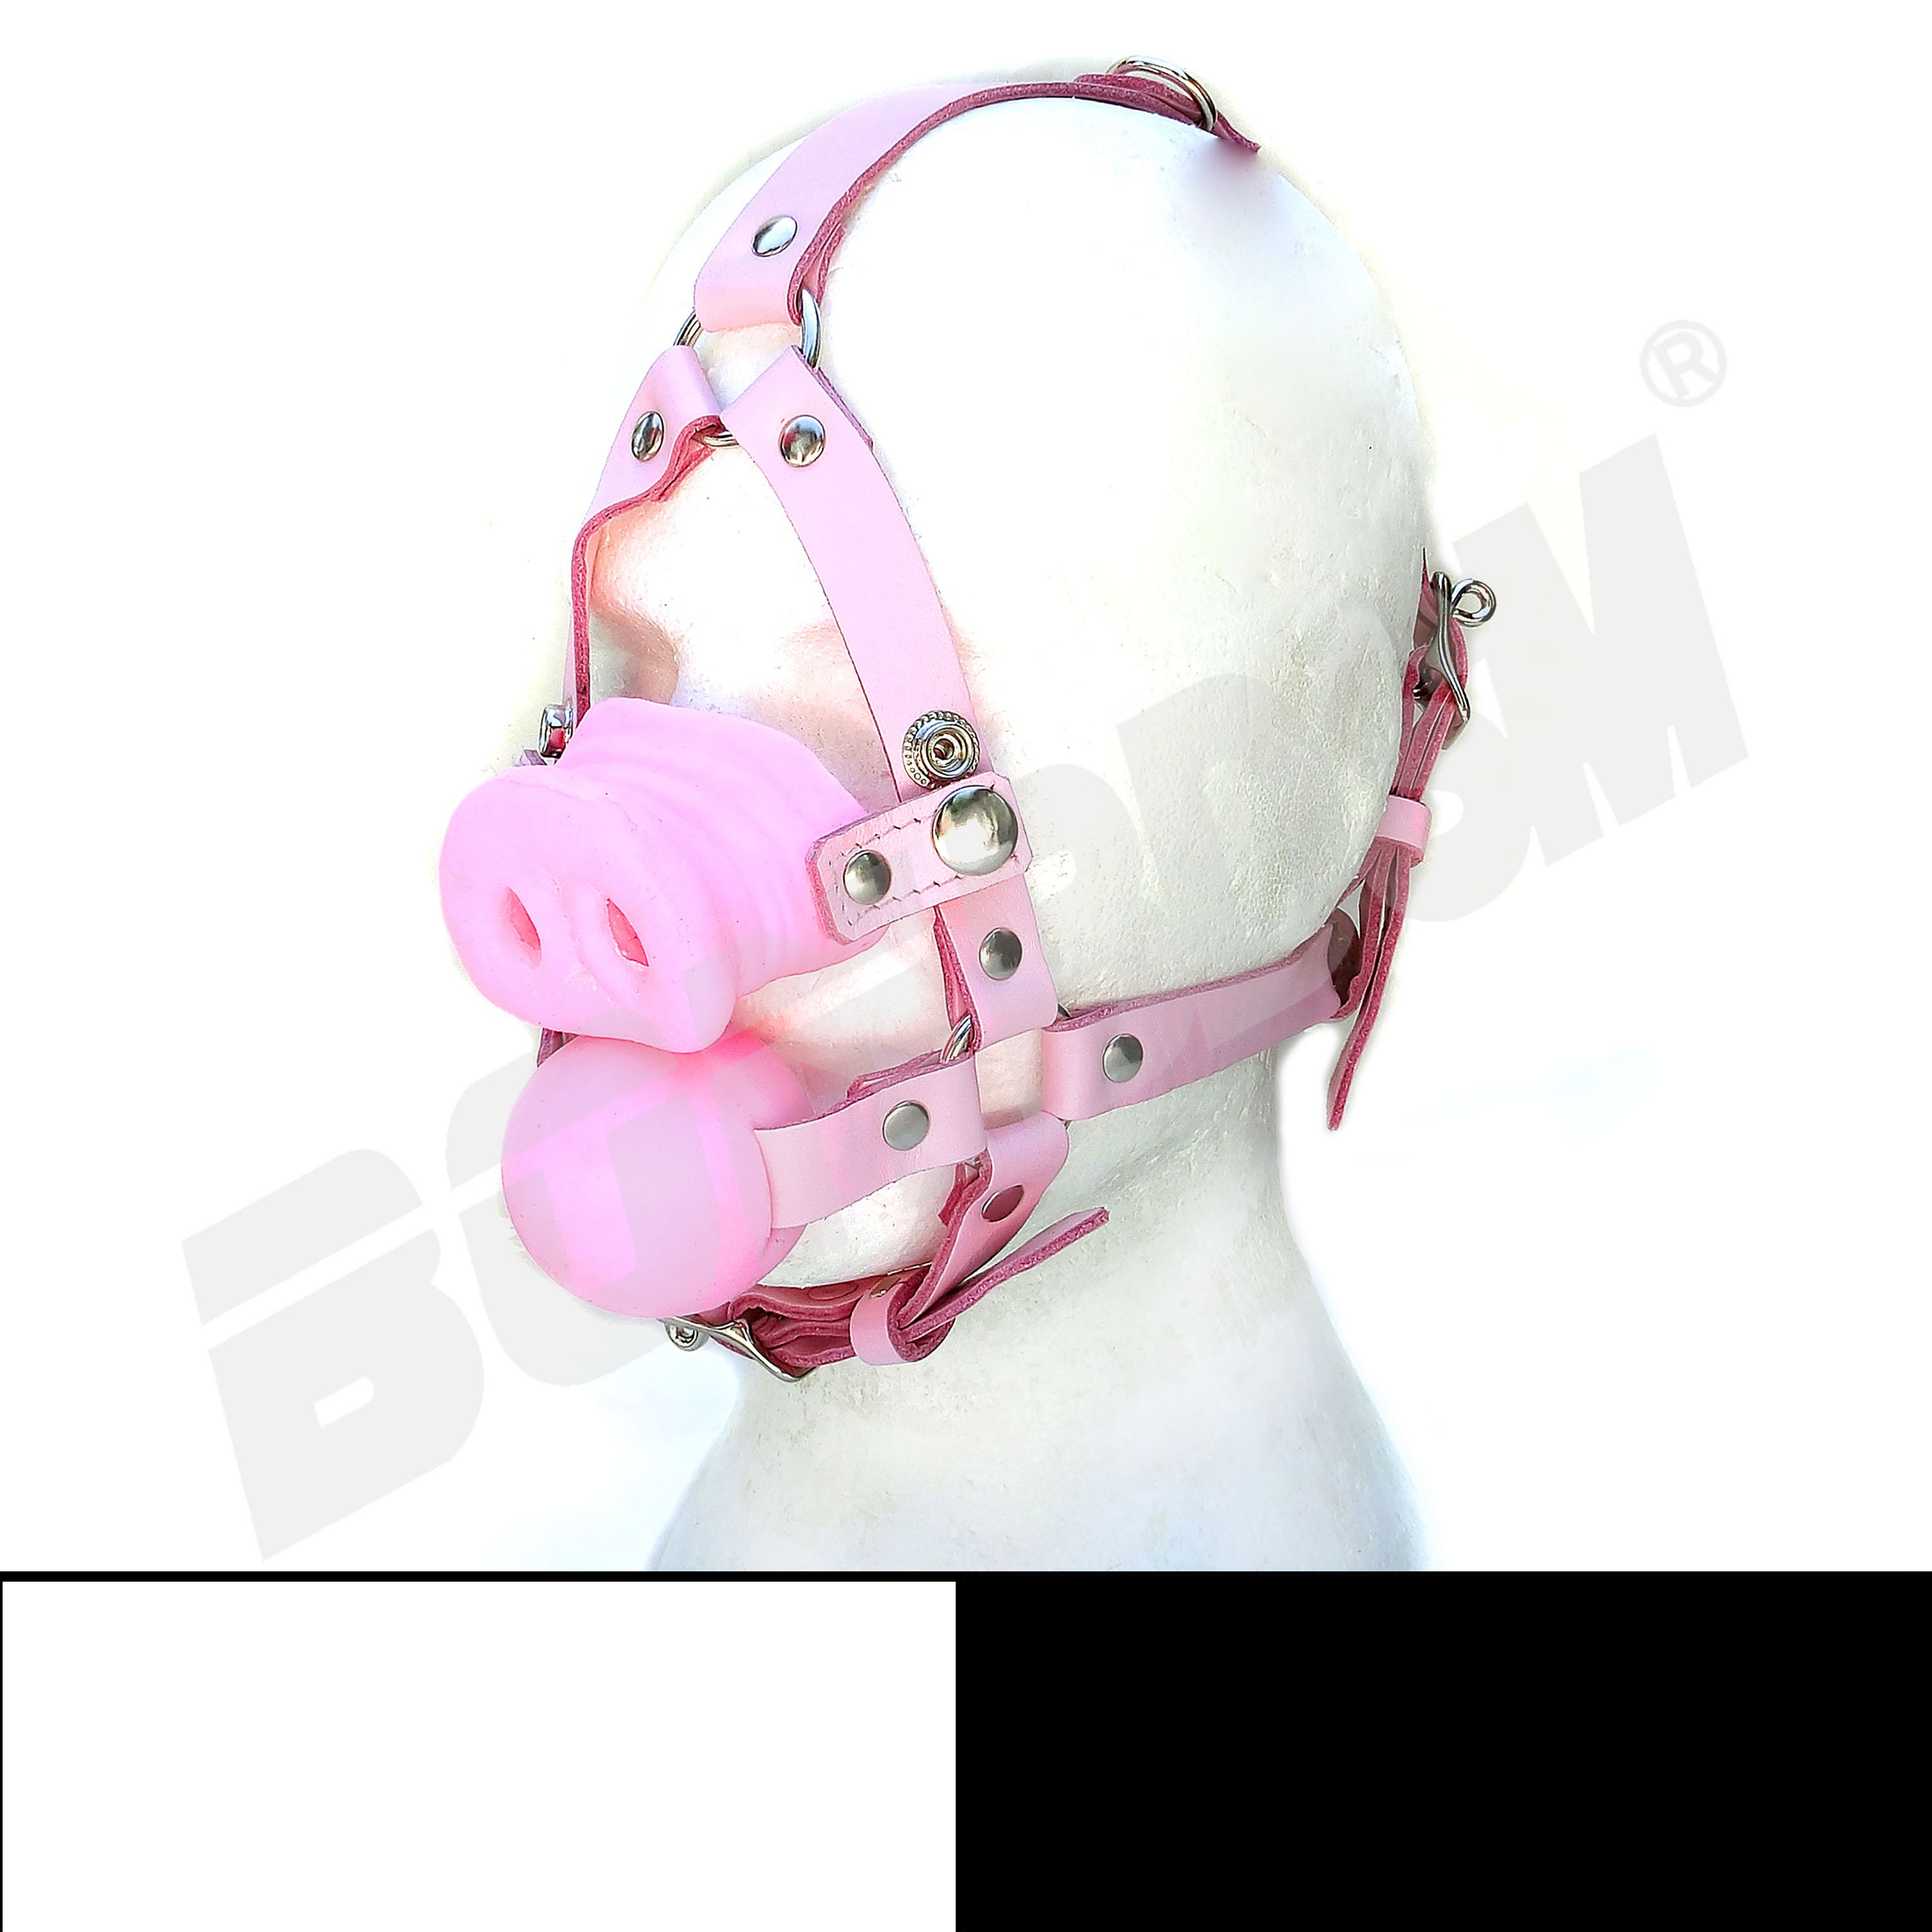 BDSM Pig Ball Gag Harness Quality Leather Non-toxic image